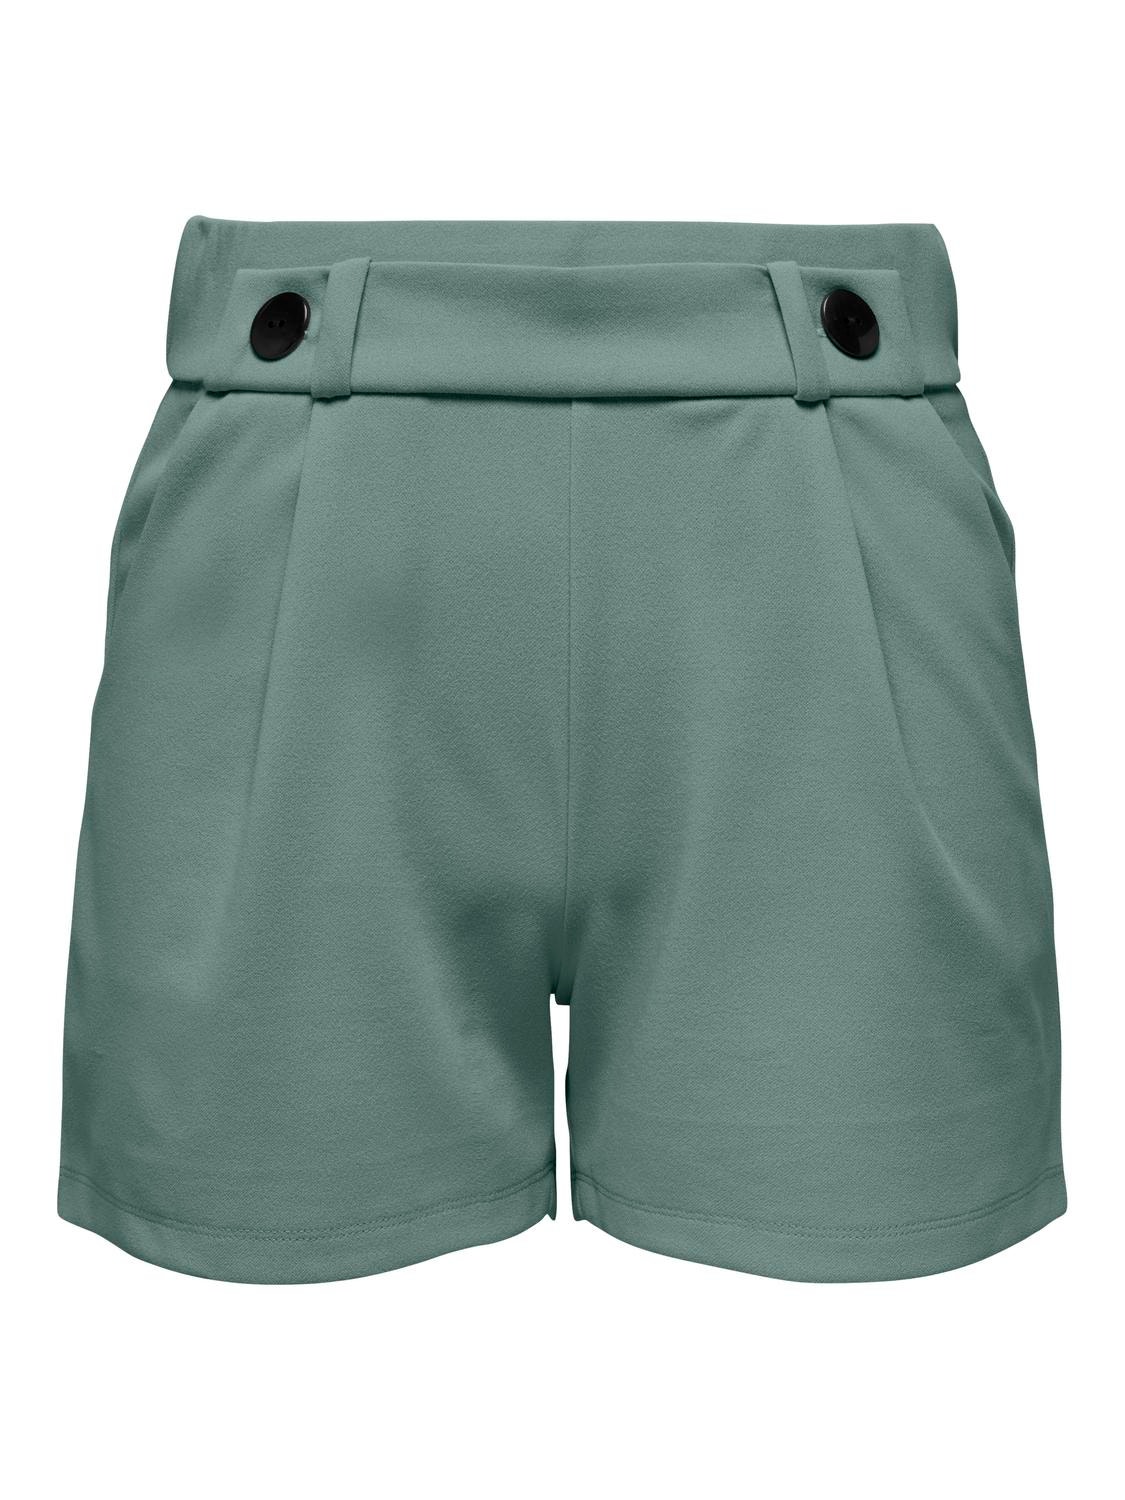 ONLY Couleur unie Short -Chinois Green - 15203098